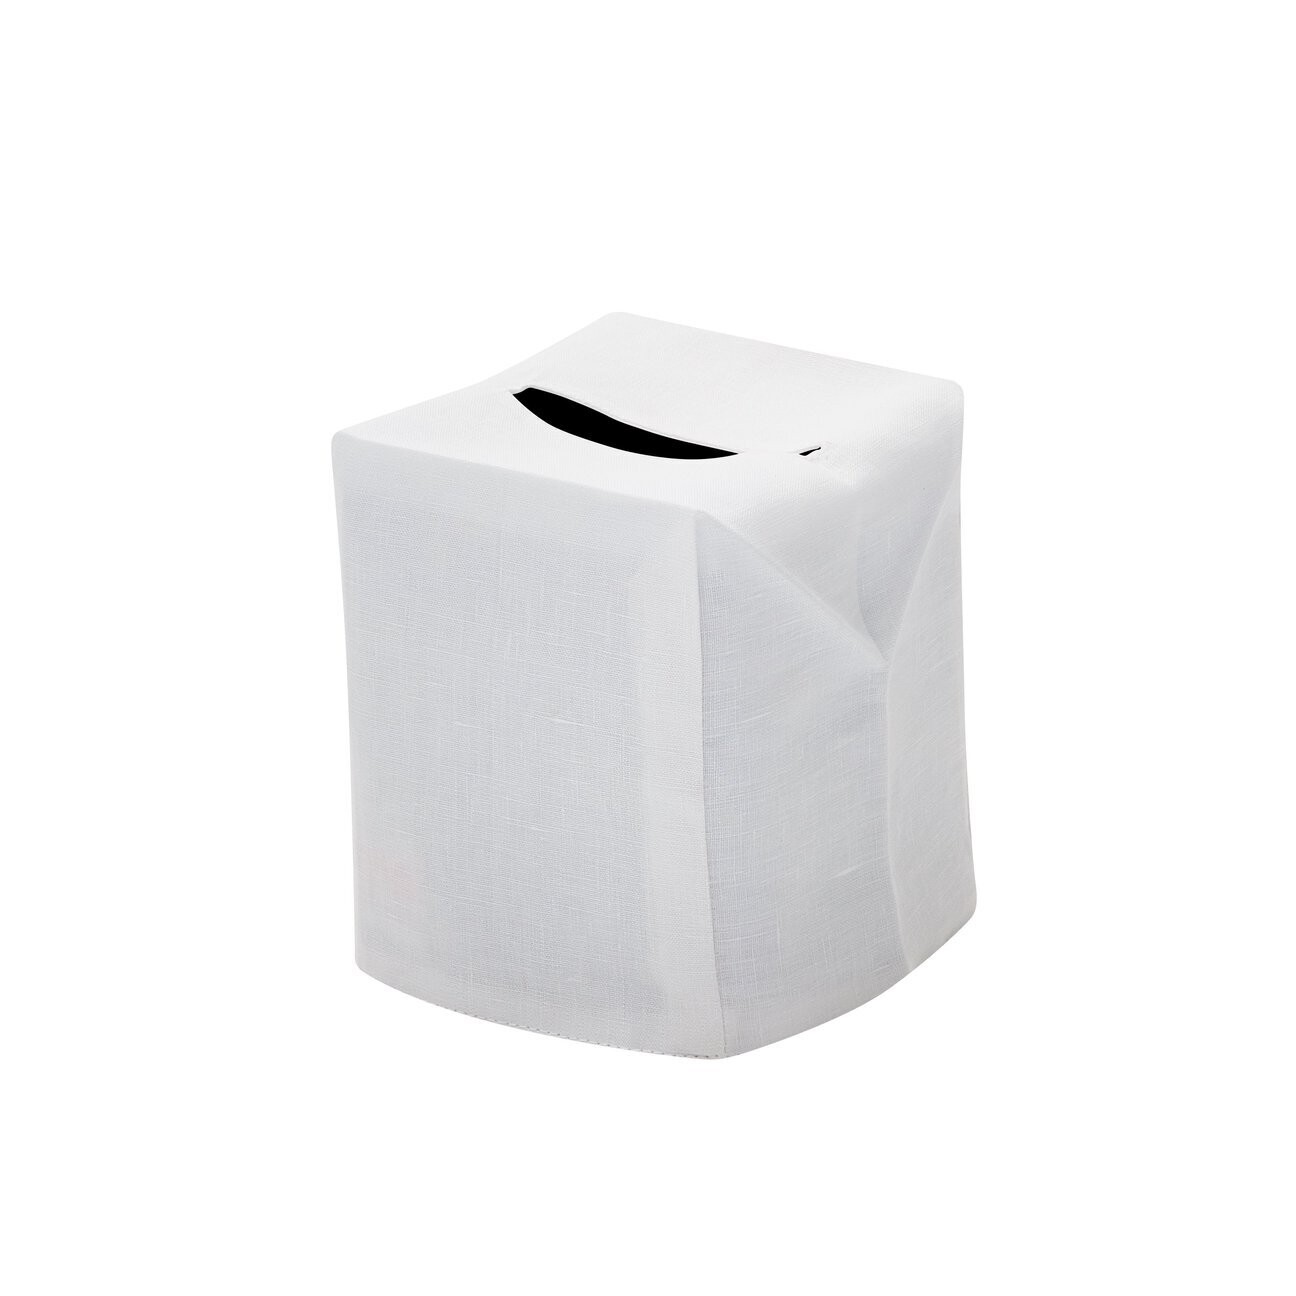 HAHO - TISSUE BOX COVER WITH MONOGRAM